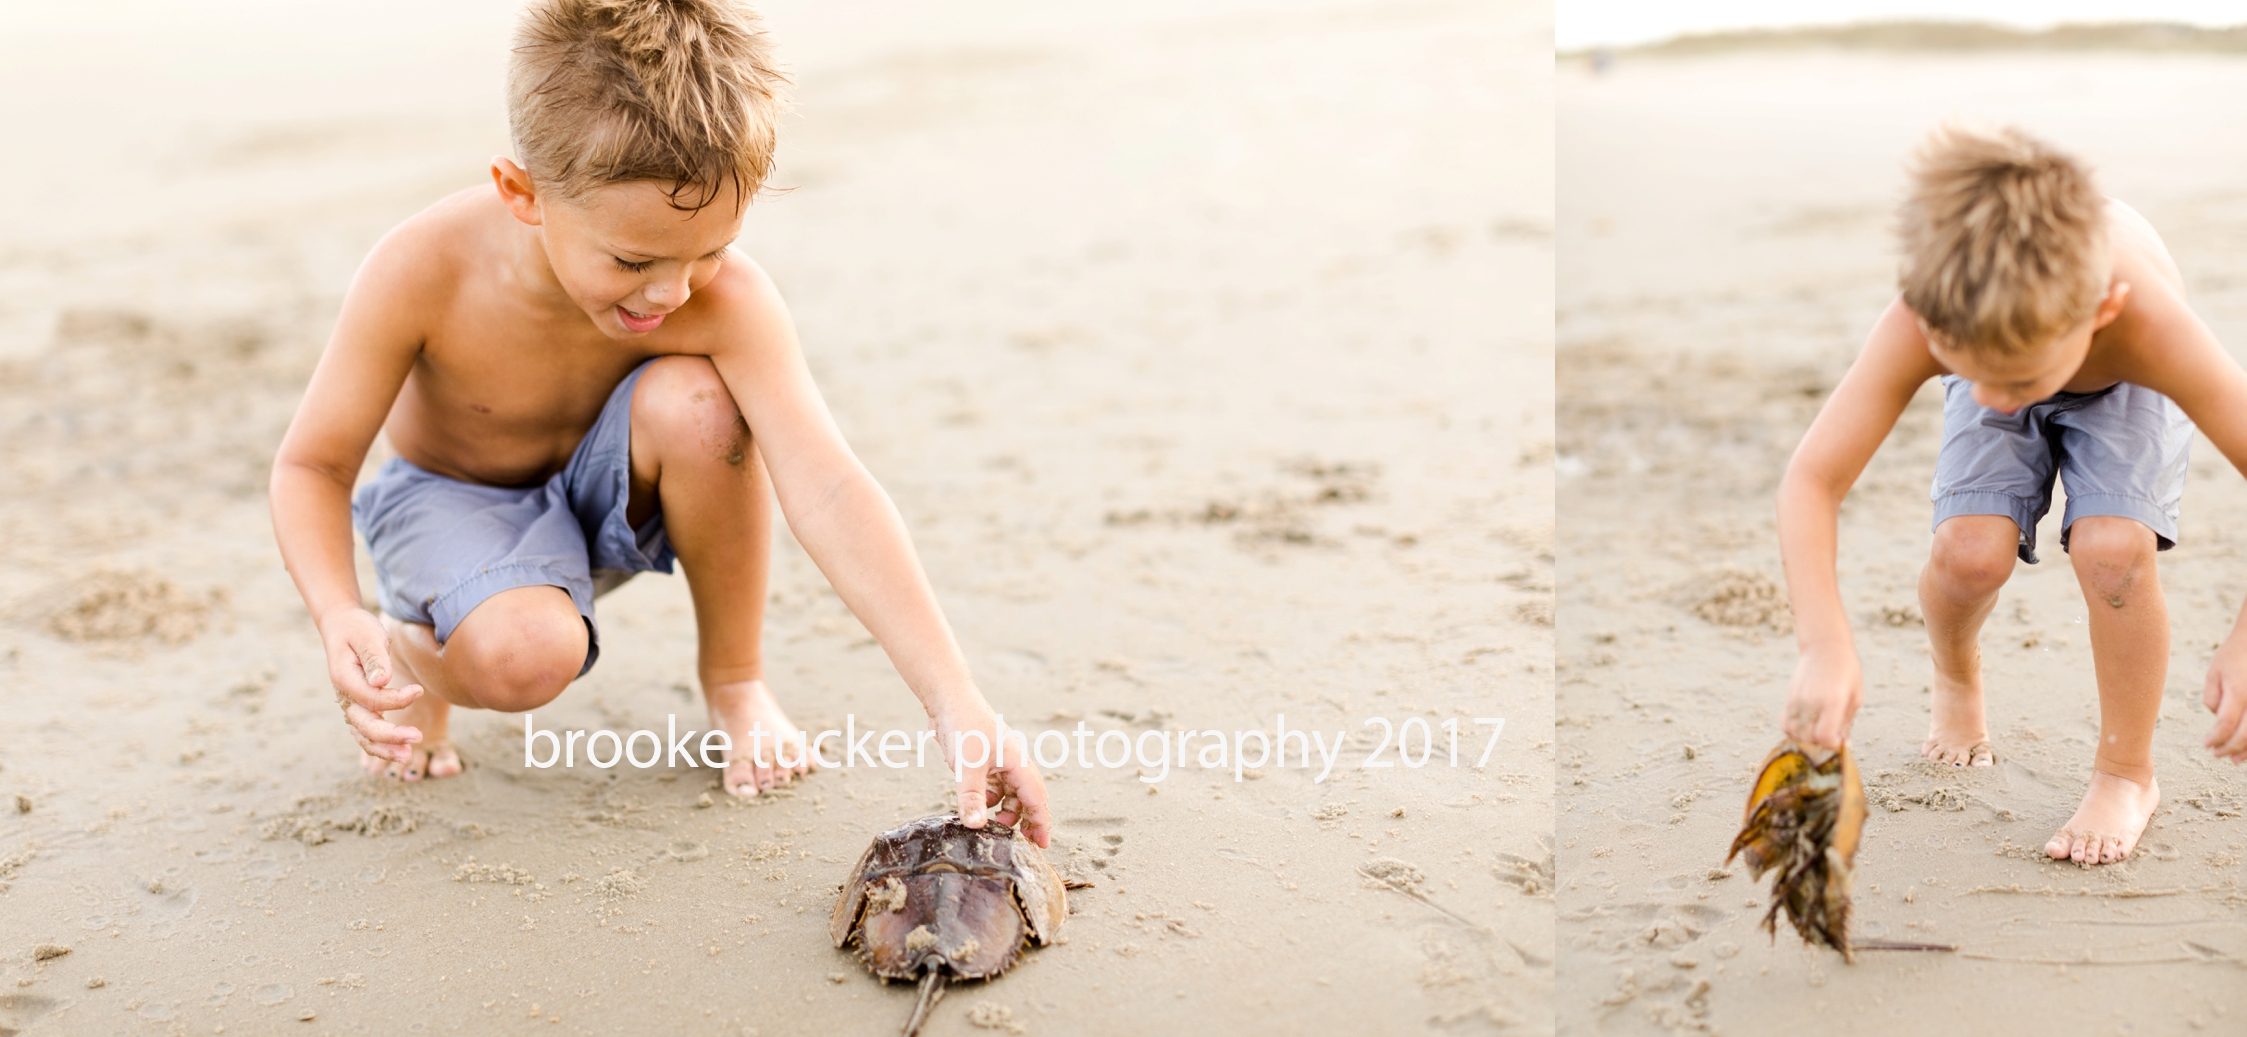 beautiful back bay golden hour children's photography by brooke tucker photographer